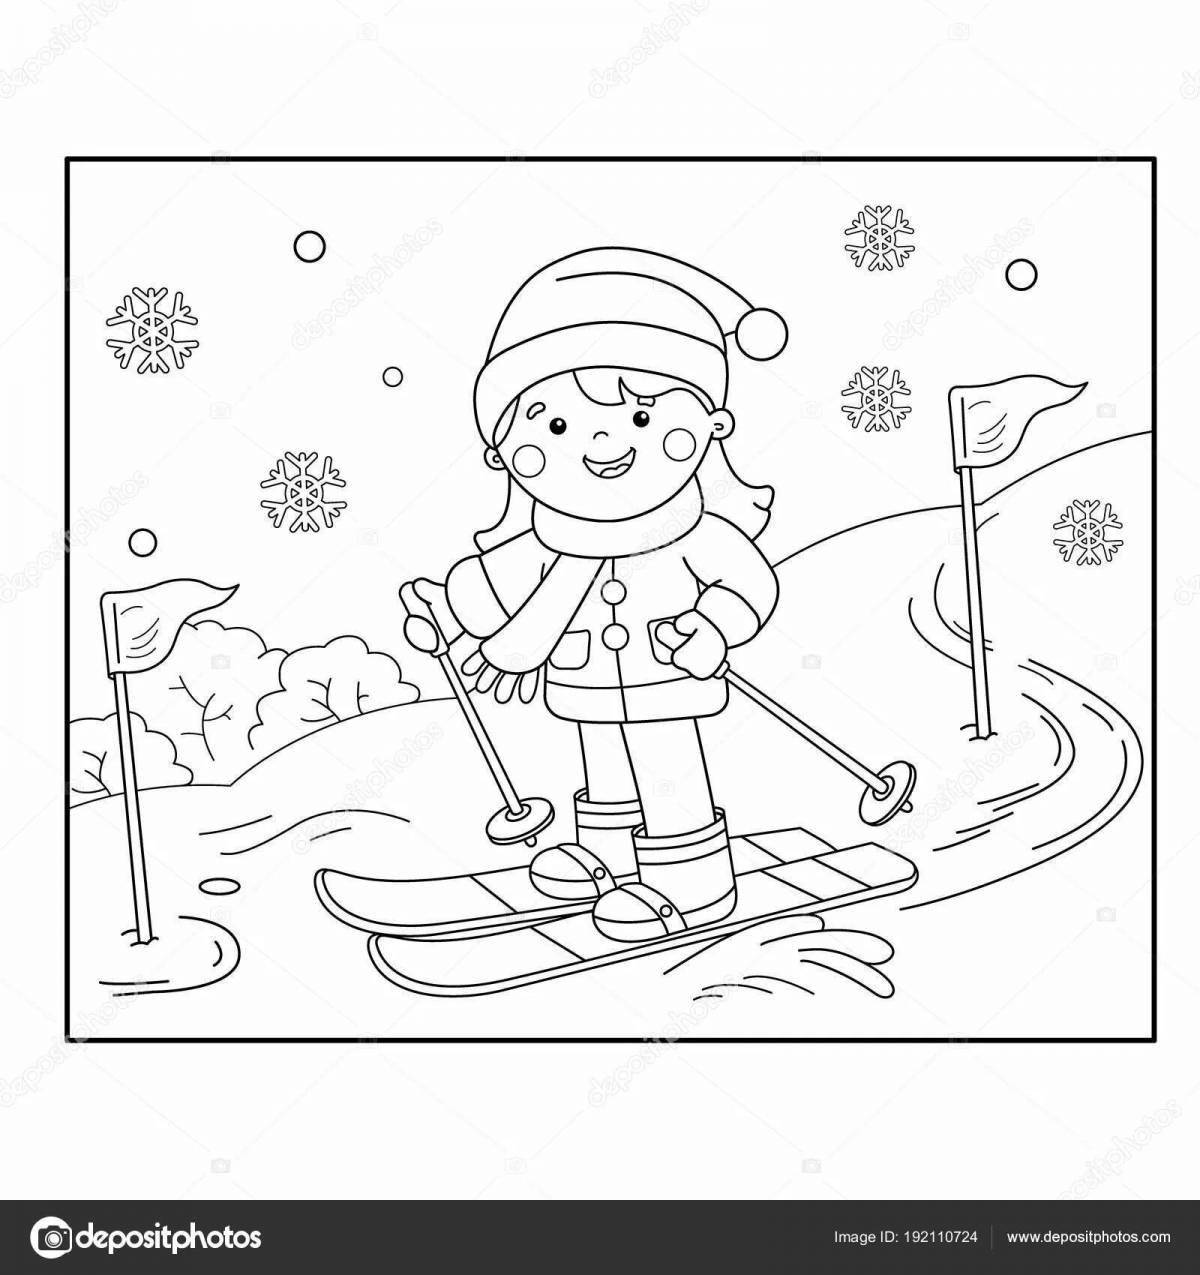 Coloring skier for children 6-7 years old